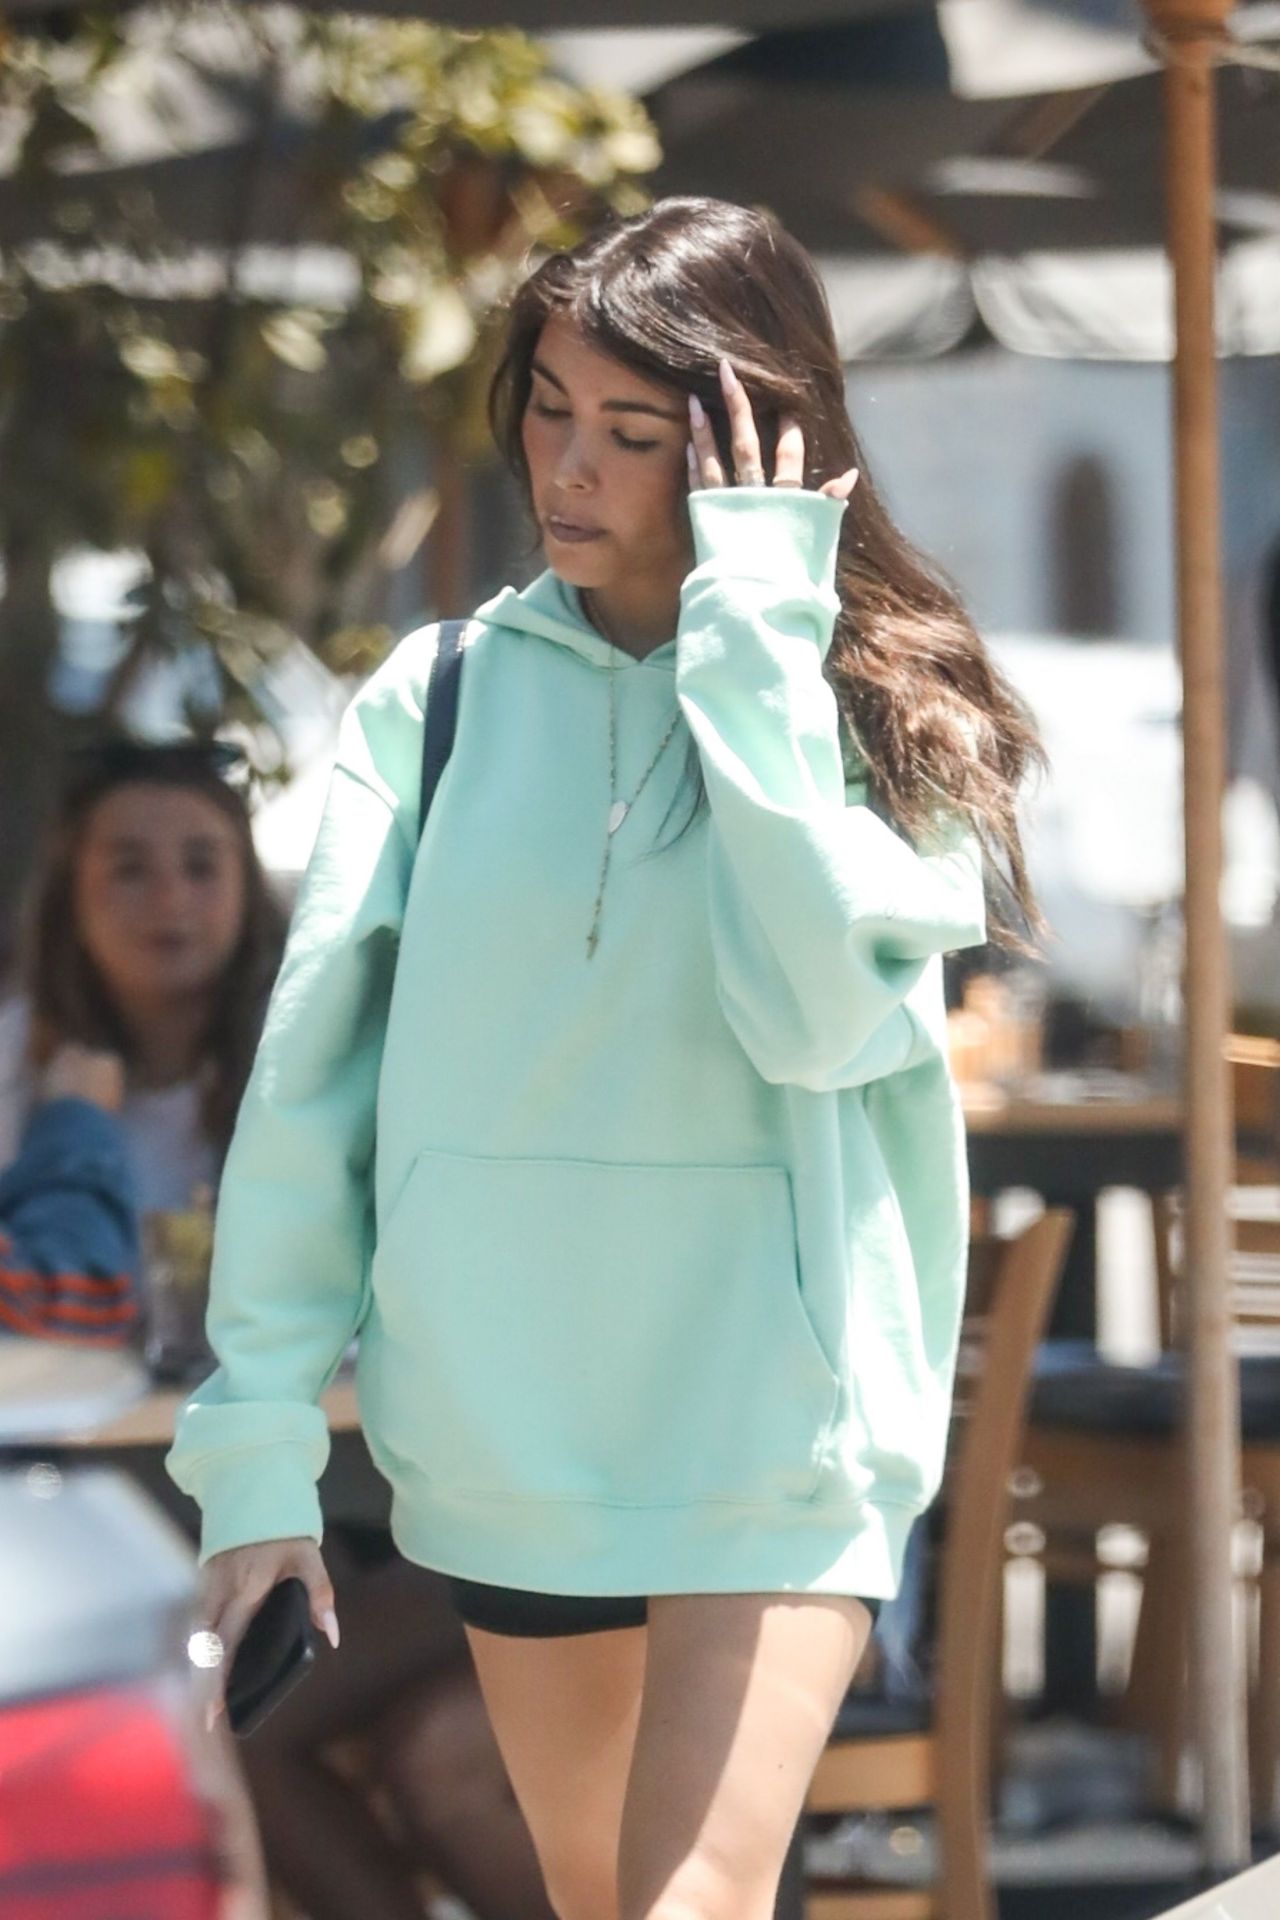 Madison Beer West Hollywood February 13, 2019 – Star Style